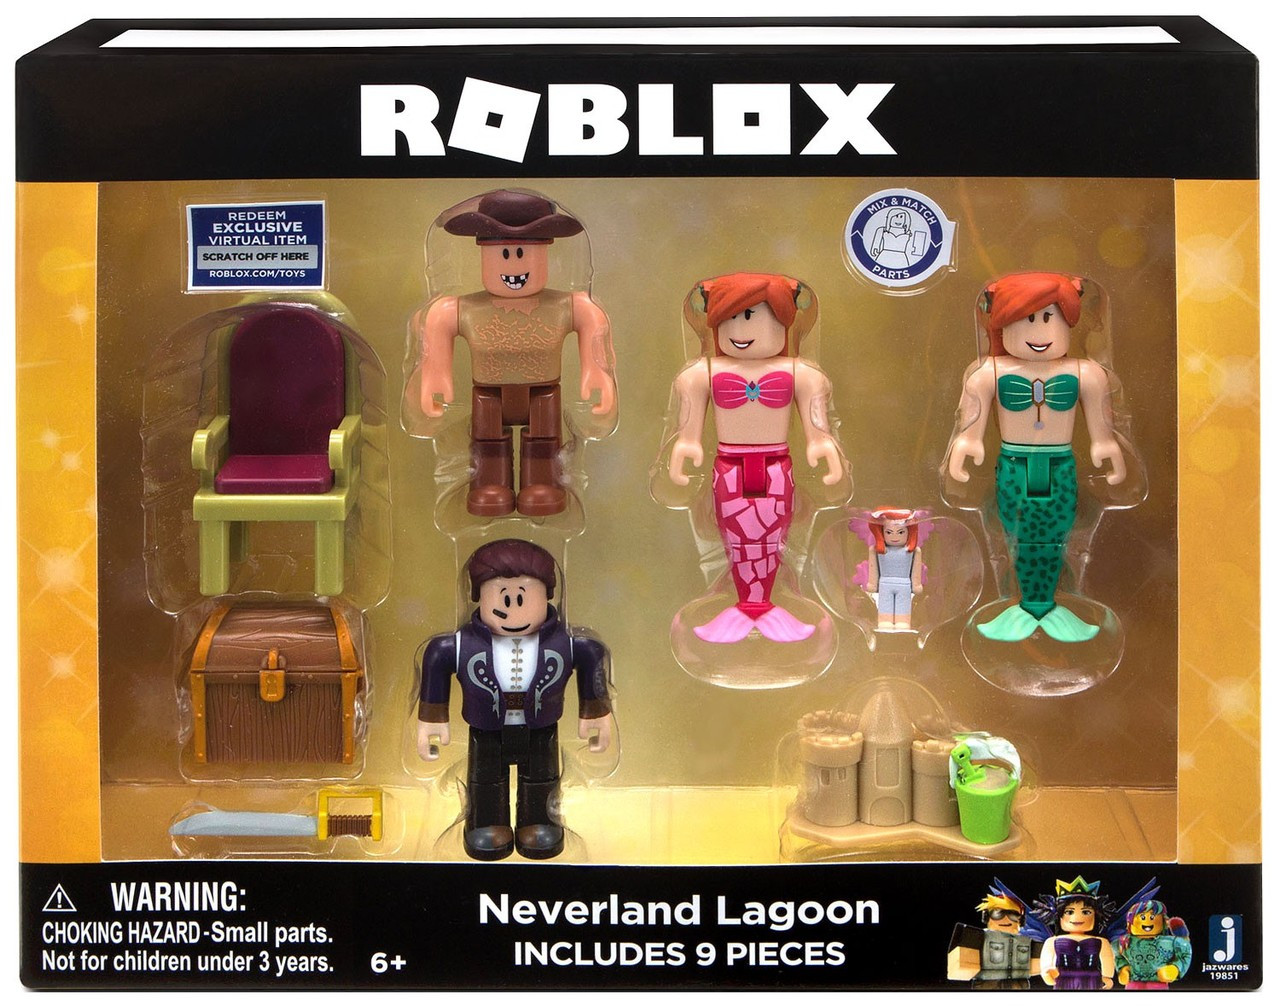 Roblox Celebrity Collection Neverland Lagoon Action Figure 4 Pack - details about roblox celebrity collection roblox bride with exclusive virtual item